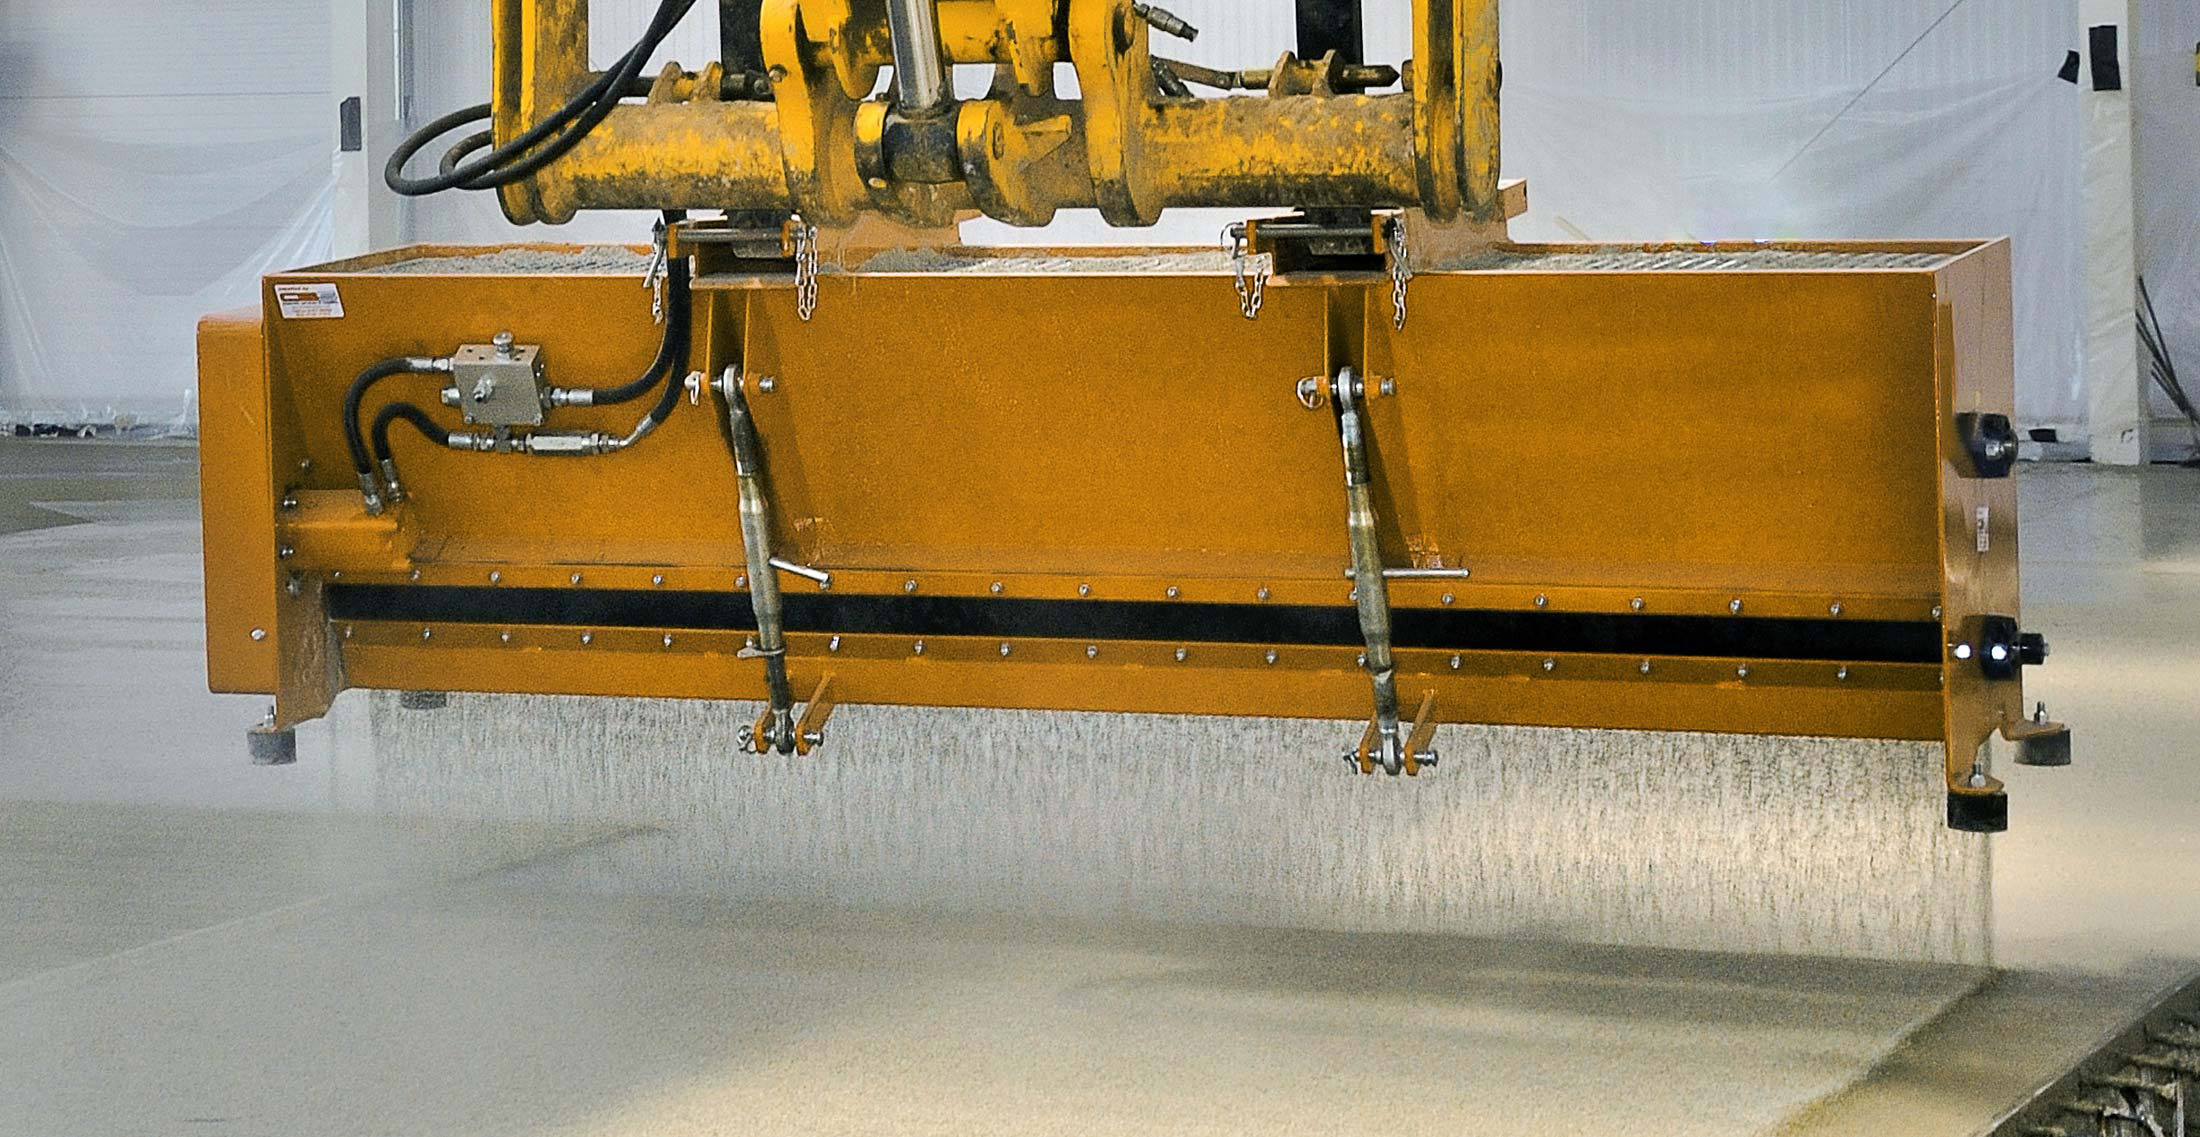 A Close Up Of The Contop Dry Shake Topping Spreader In Action